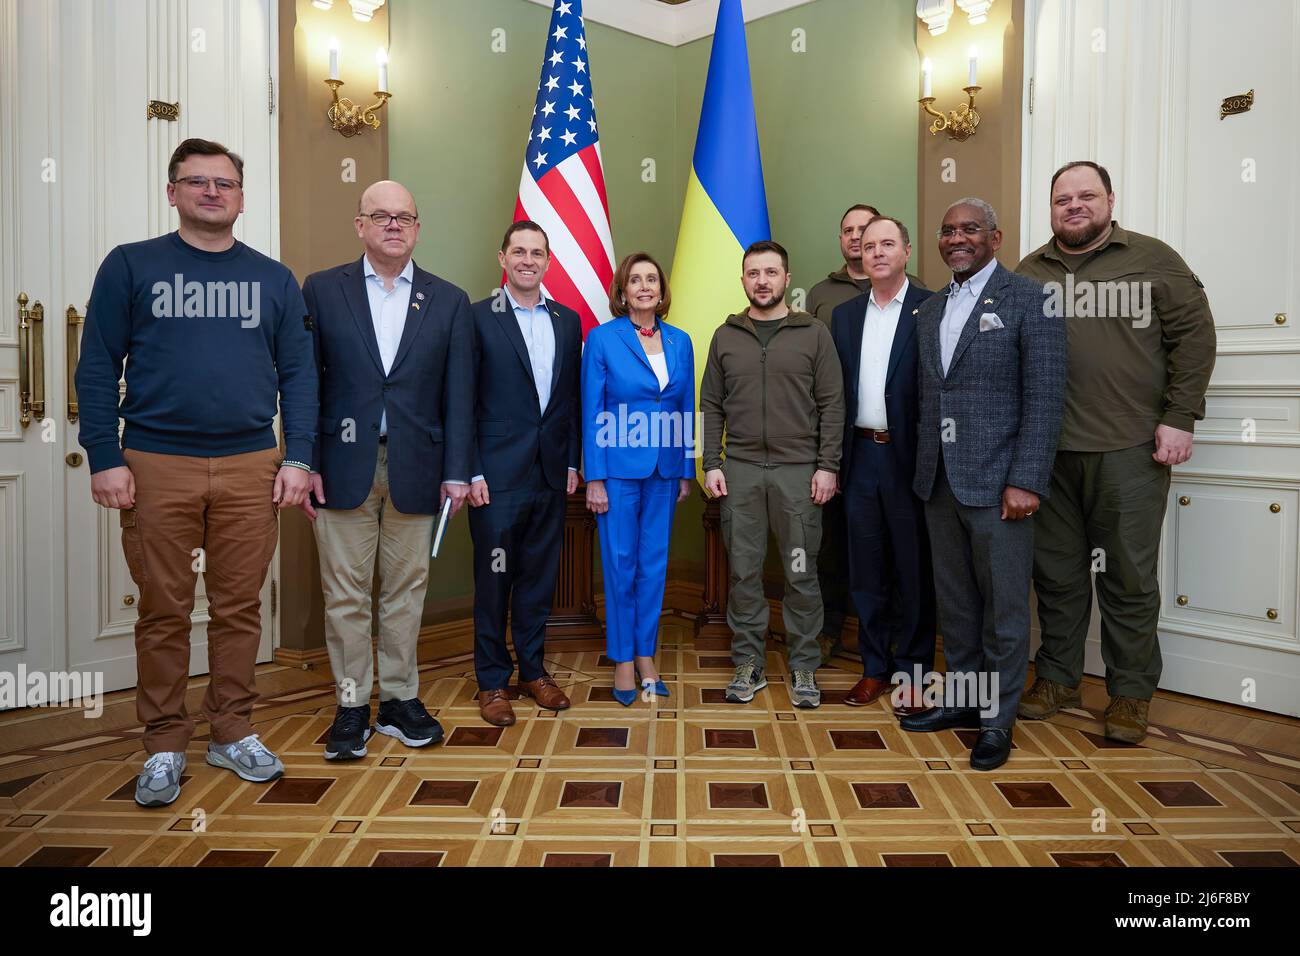 President of Ukraine Volodymyr Zelenskyy met with Speaker of the House of Representatives of the United States Congress Nancy Pelosi, who is on a visit to Ukraine with a delegation of congressmen.  The President thanked the Speaker for her visit.  President Volodymyr Zelenskyy awarded the Order of Princess Olga to Speaker of the US House of Representatives Nancy Pelosi for her significant personal contribution to strengthening Ukrainian-American interstate cooperation and supporting sovereign, independent and democratic Ukraine. PHOTO: Ukraine Presidential Office Stock Photo